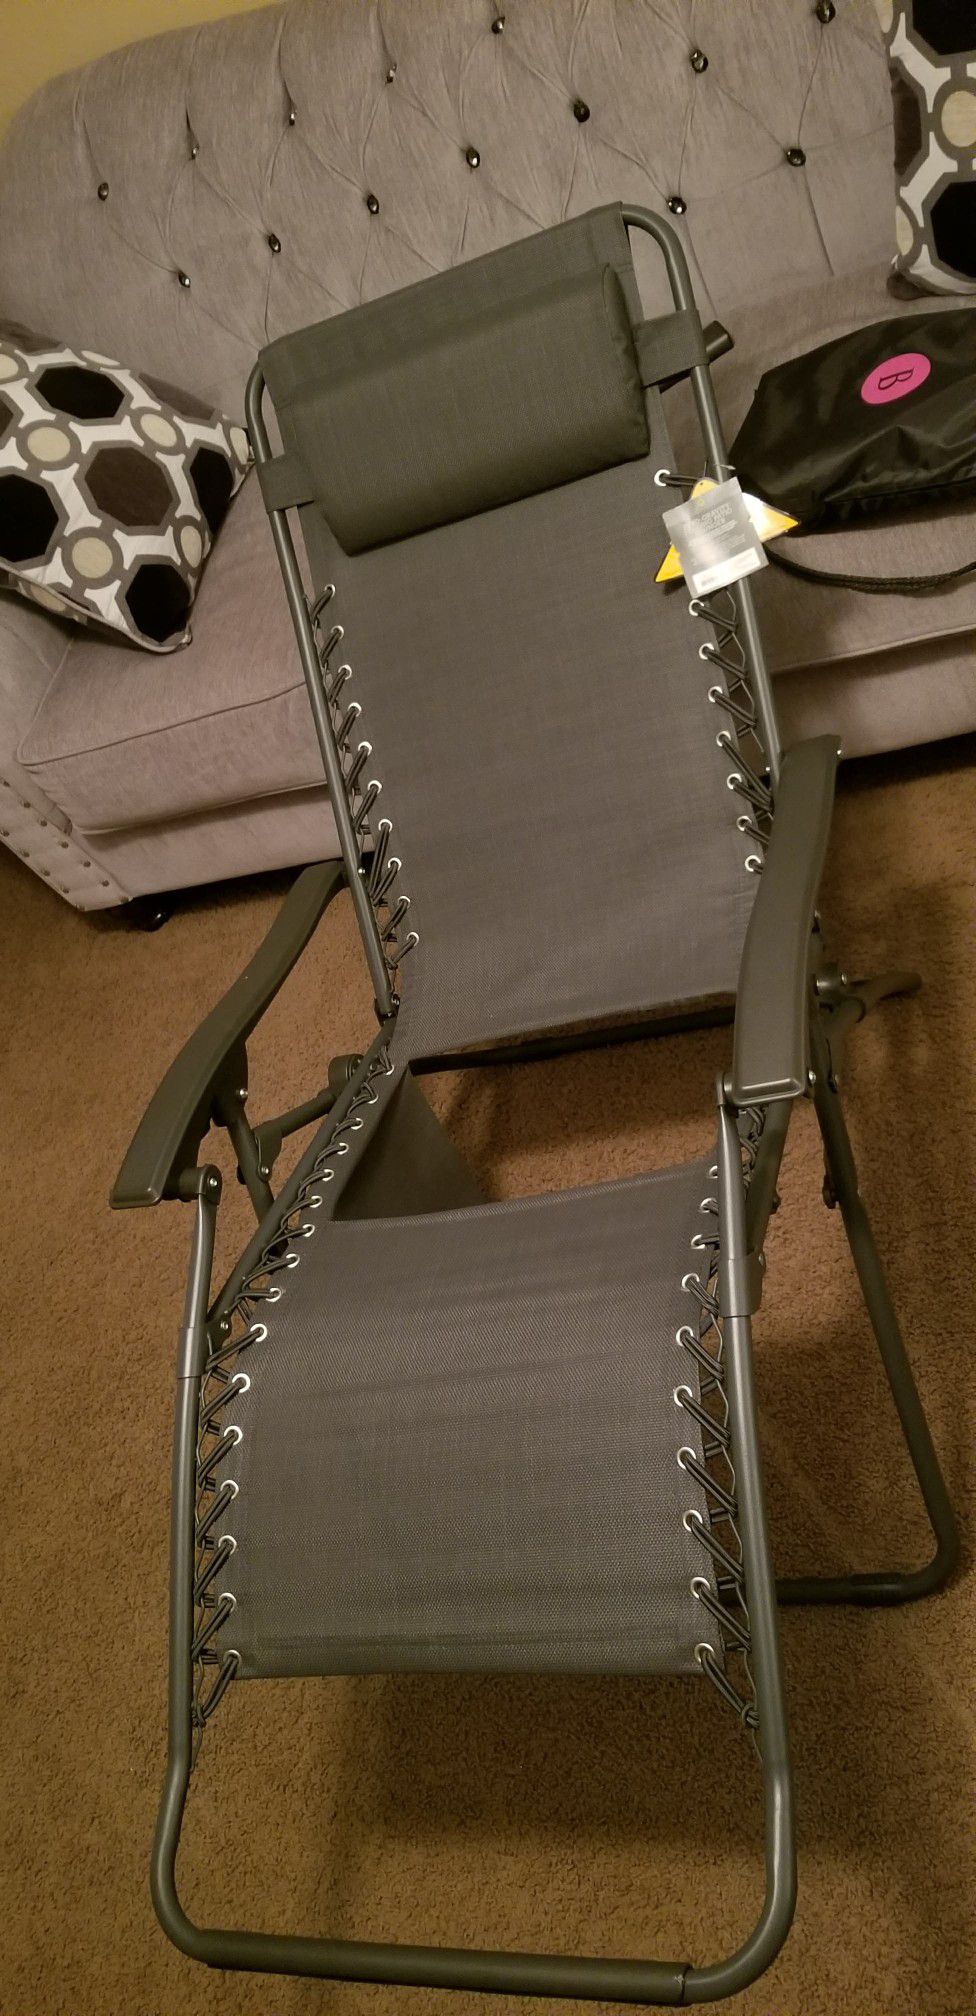 Making a BBL chair using a oversized zero gravity chair () Sciss